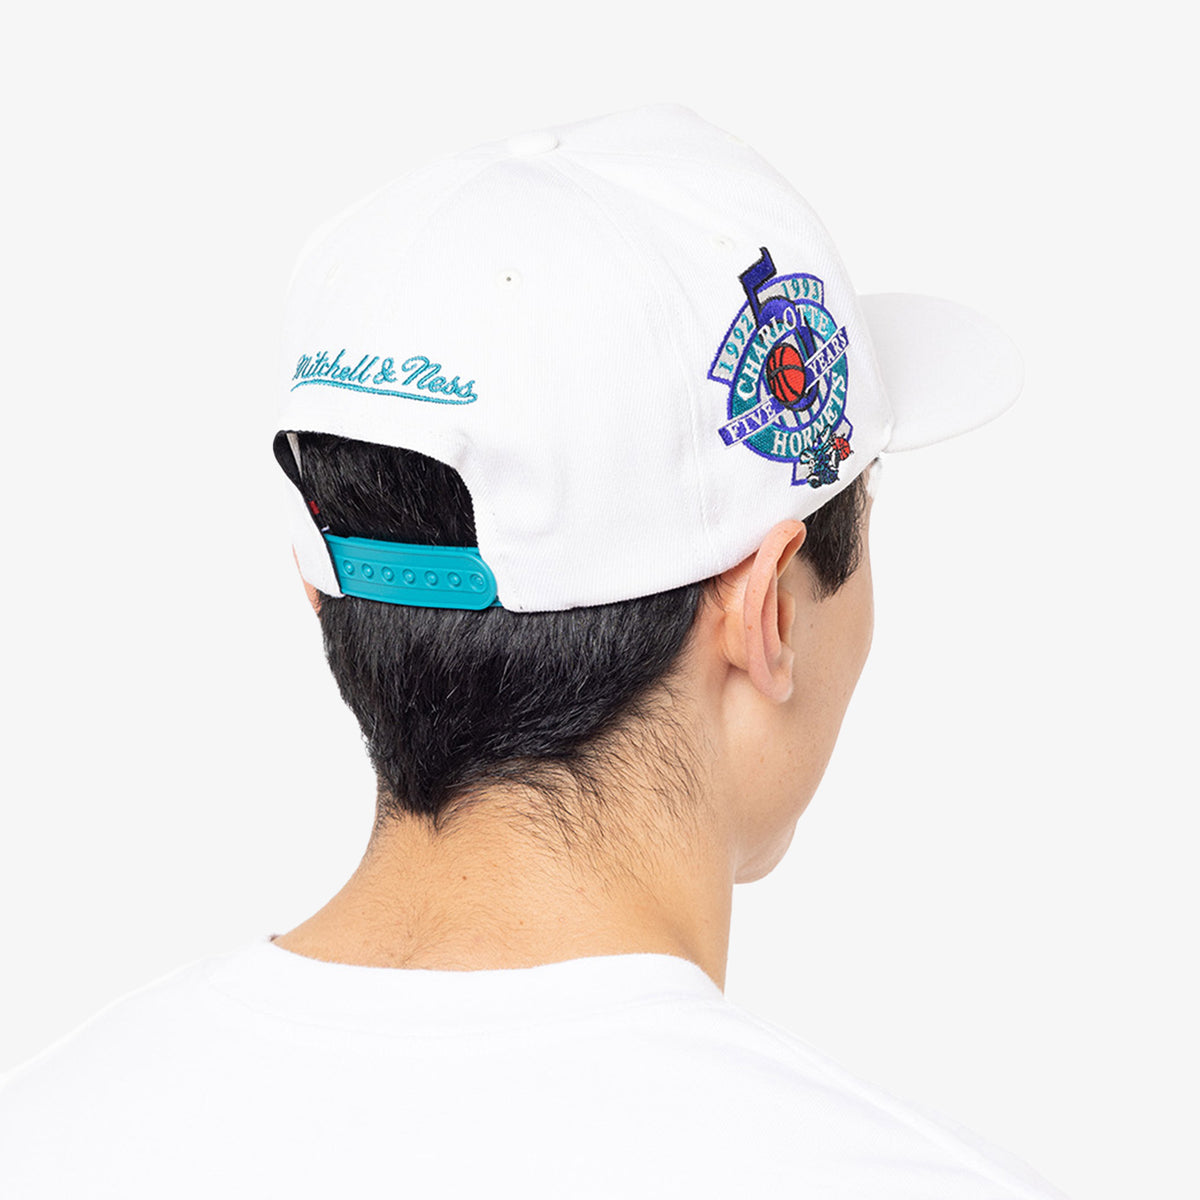 Charlotte Hornets Wool Solid Black/White Snapback - Mitchell & Ness